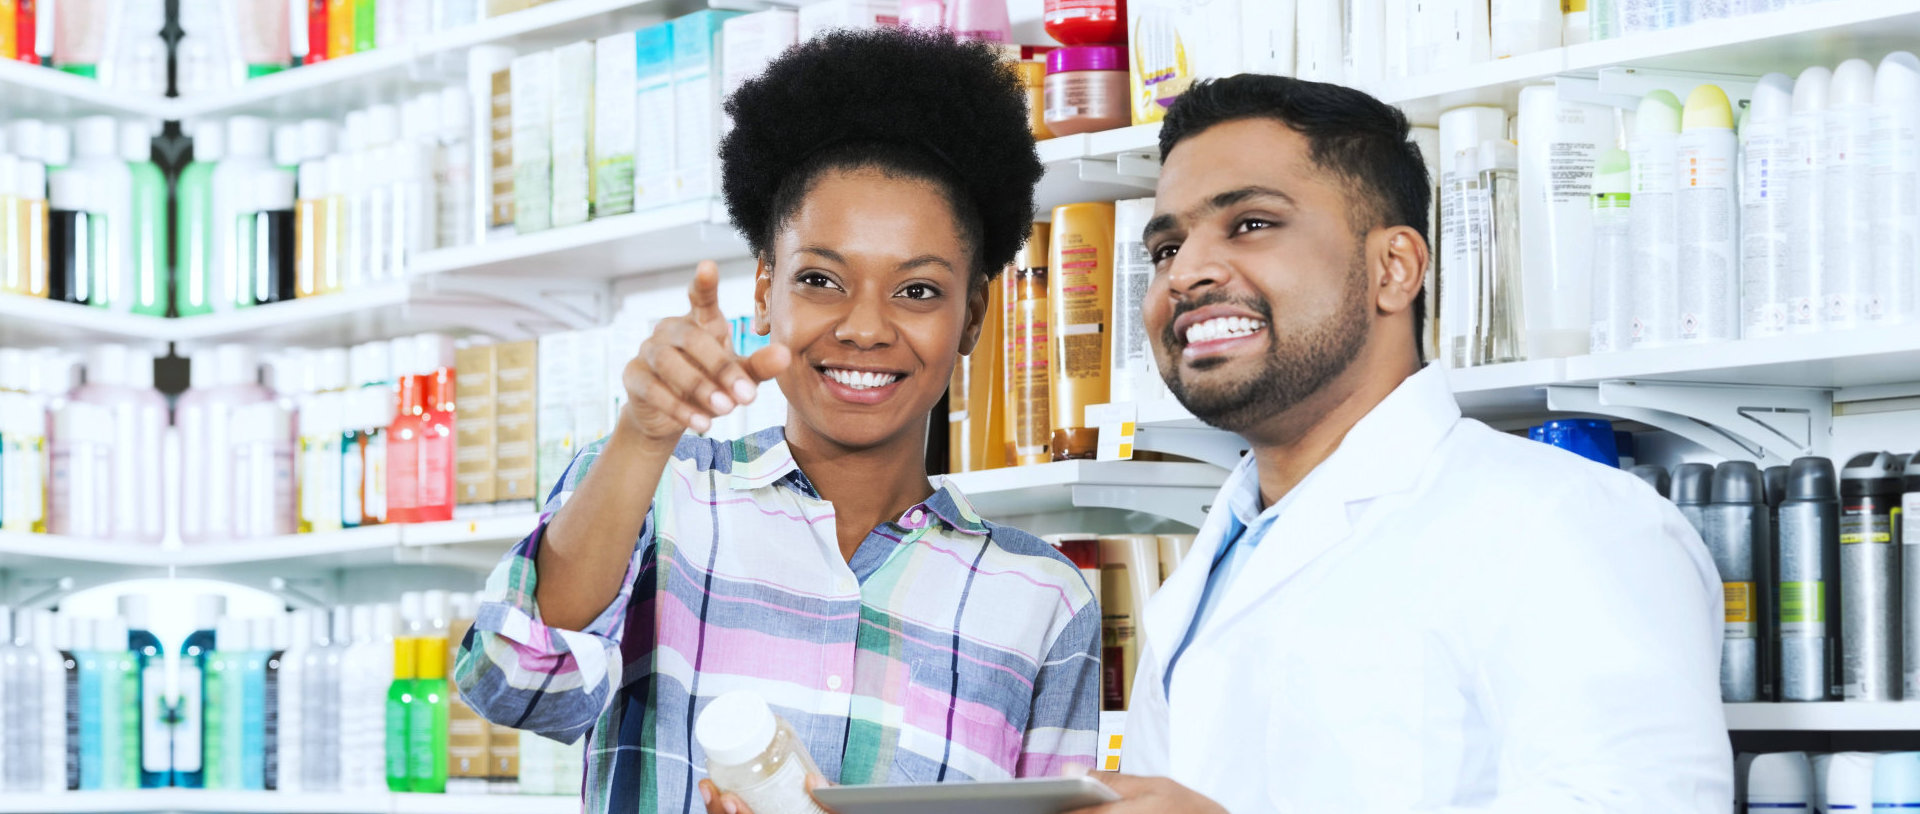 customer pointing at a pharmacy product requiring assistance with a pharmacist